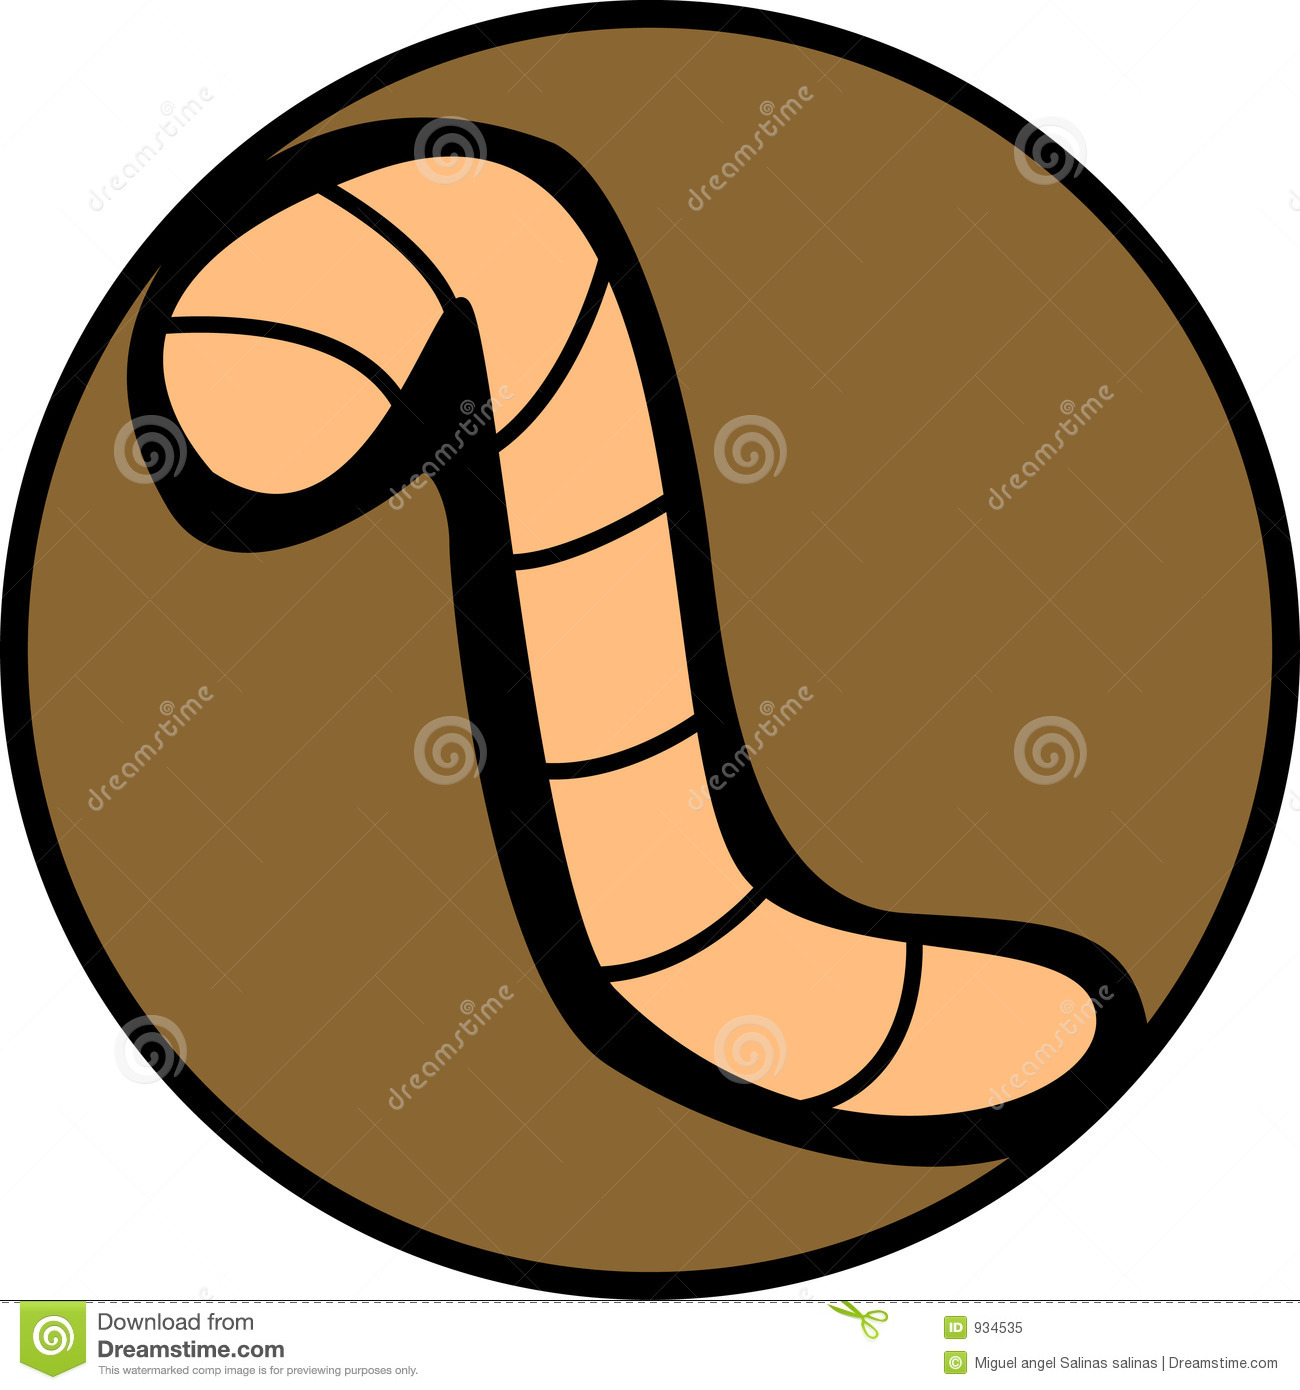 Illustration Of A Worm Or Fishing Bait  Vector File Available In Eps